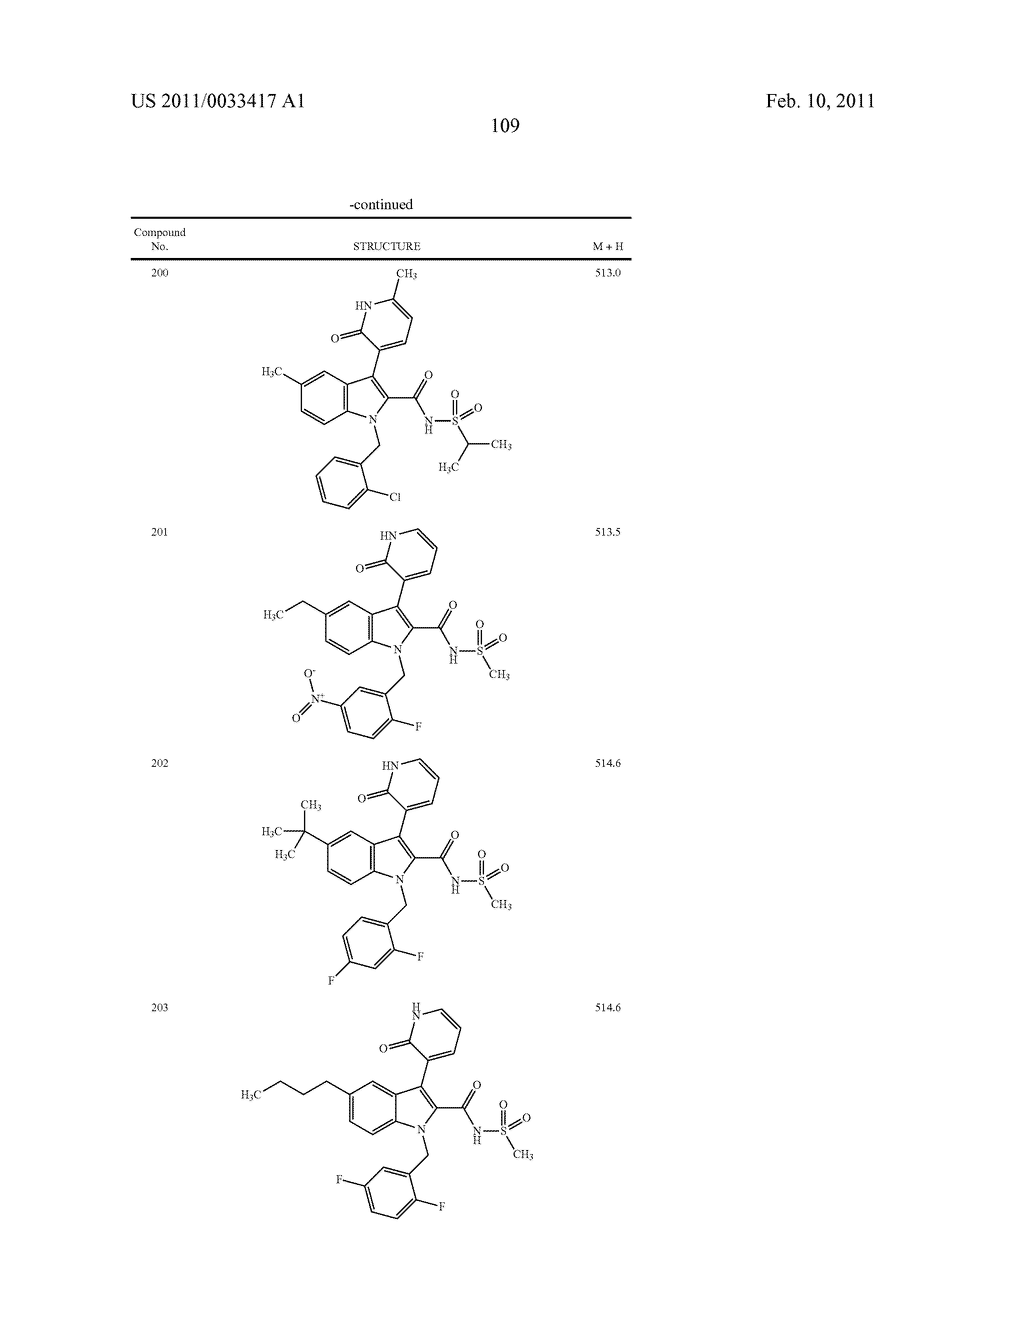 2,3-SUBSTITUTED INDOLE DERIVATIVES FOR TREATING VIRAL INFECTIONS - diagram, schematic, and image 110